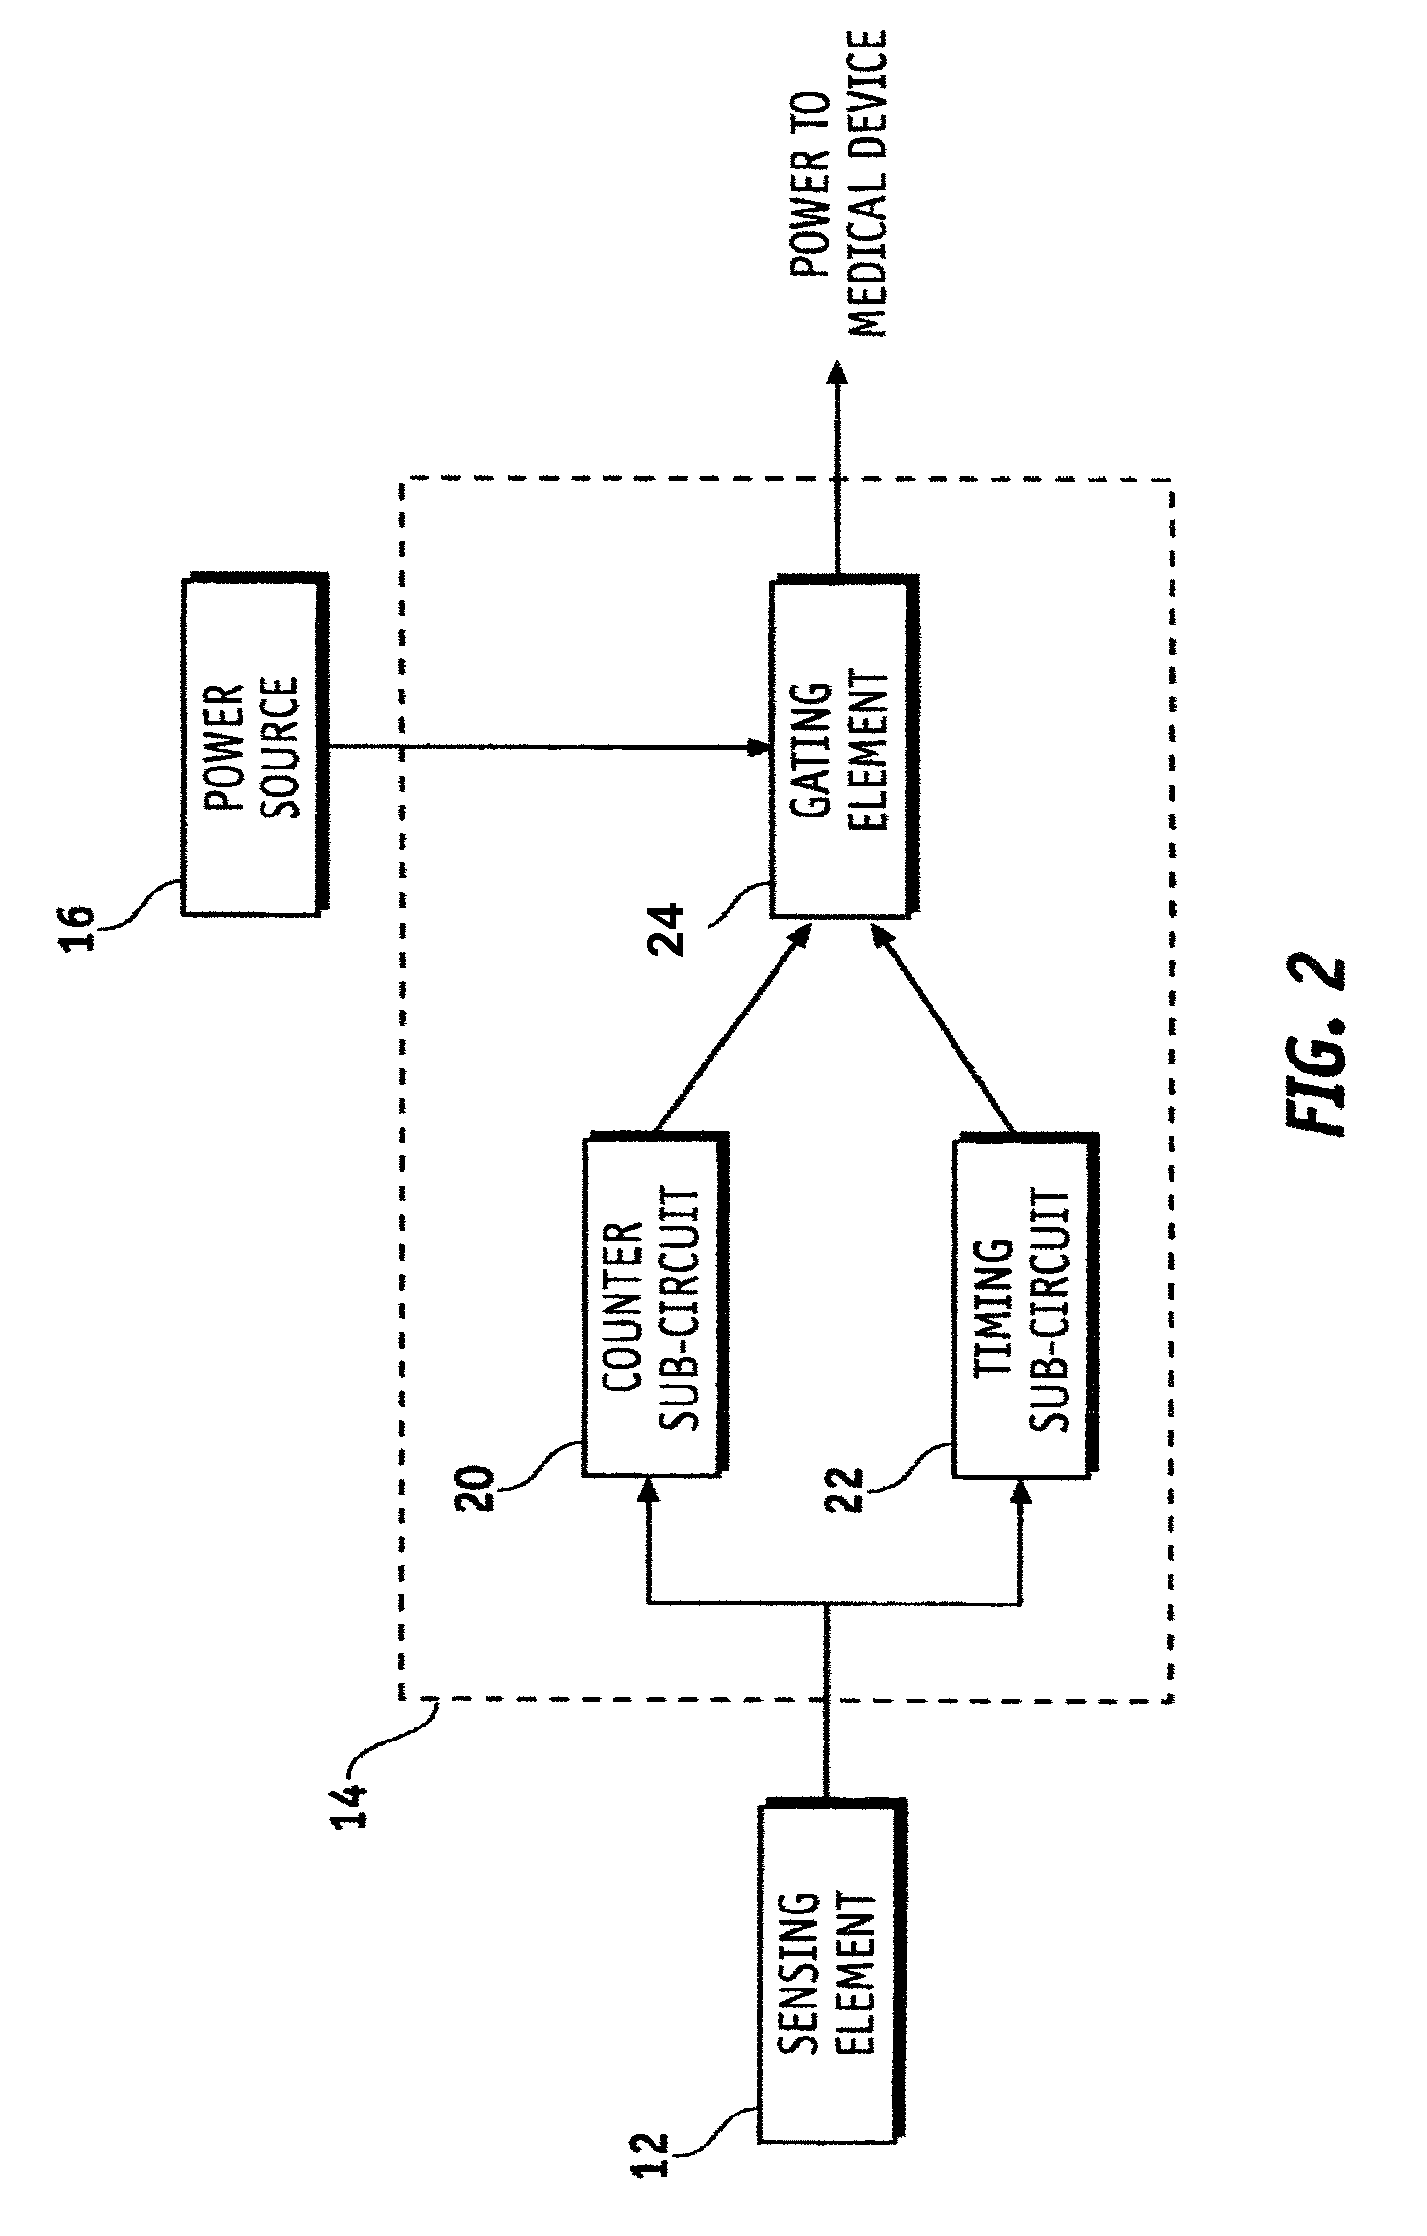 System and apparatus for remote activation of implantable medical devices